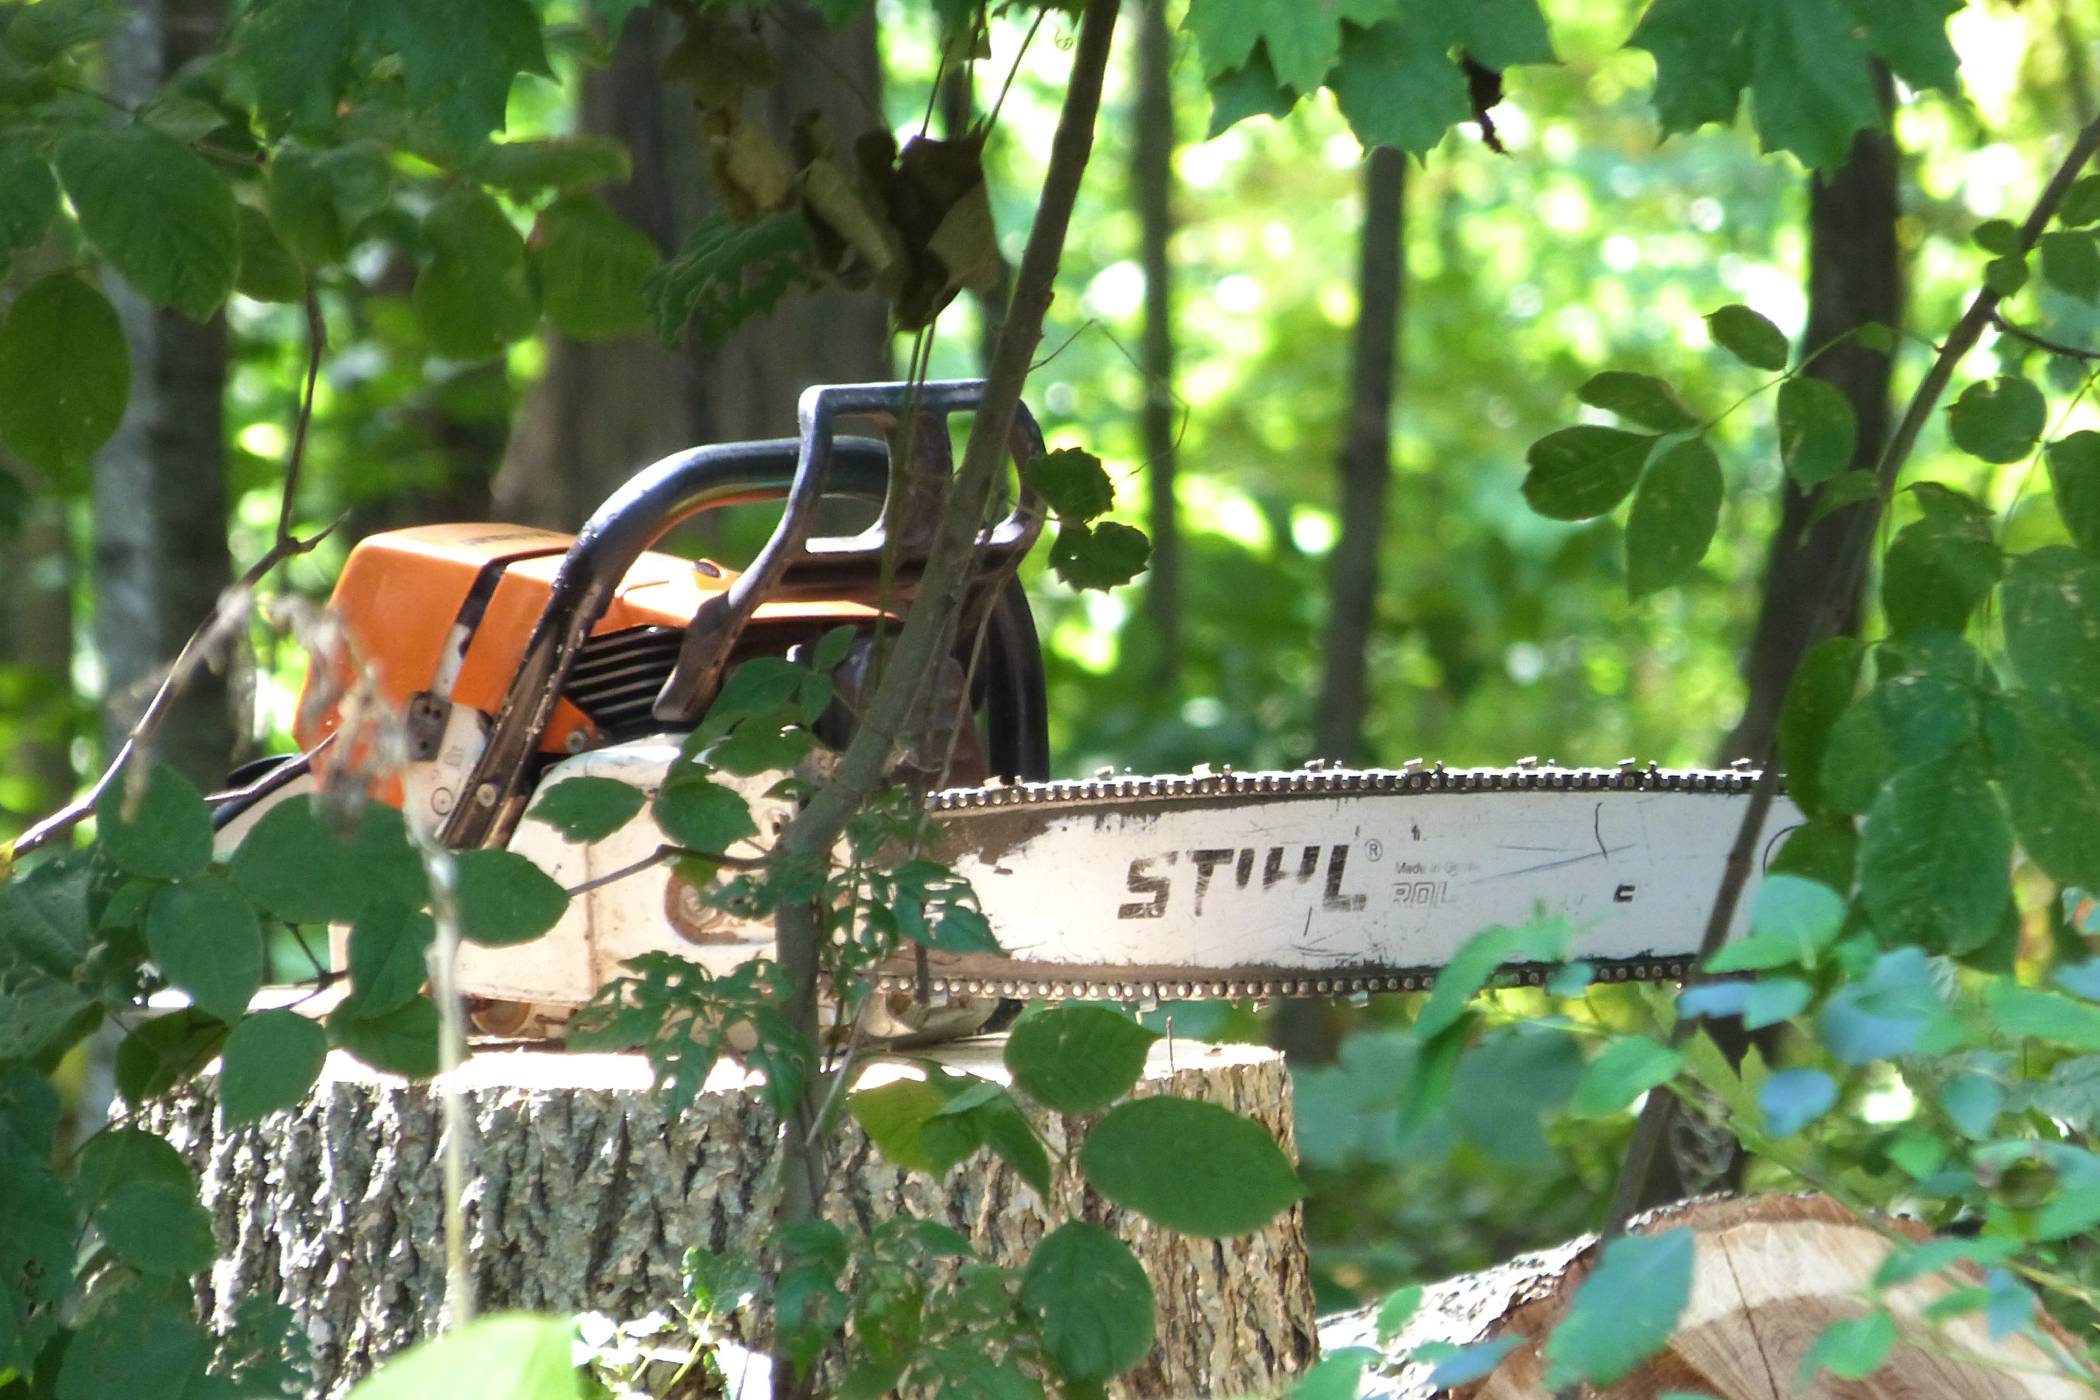 Chainsaw sitting on a tree stump surrounded by trees and branches.